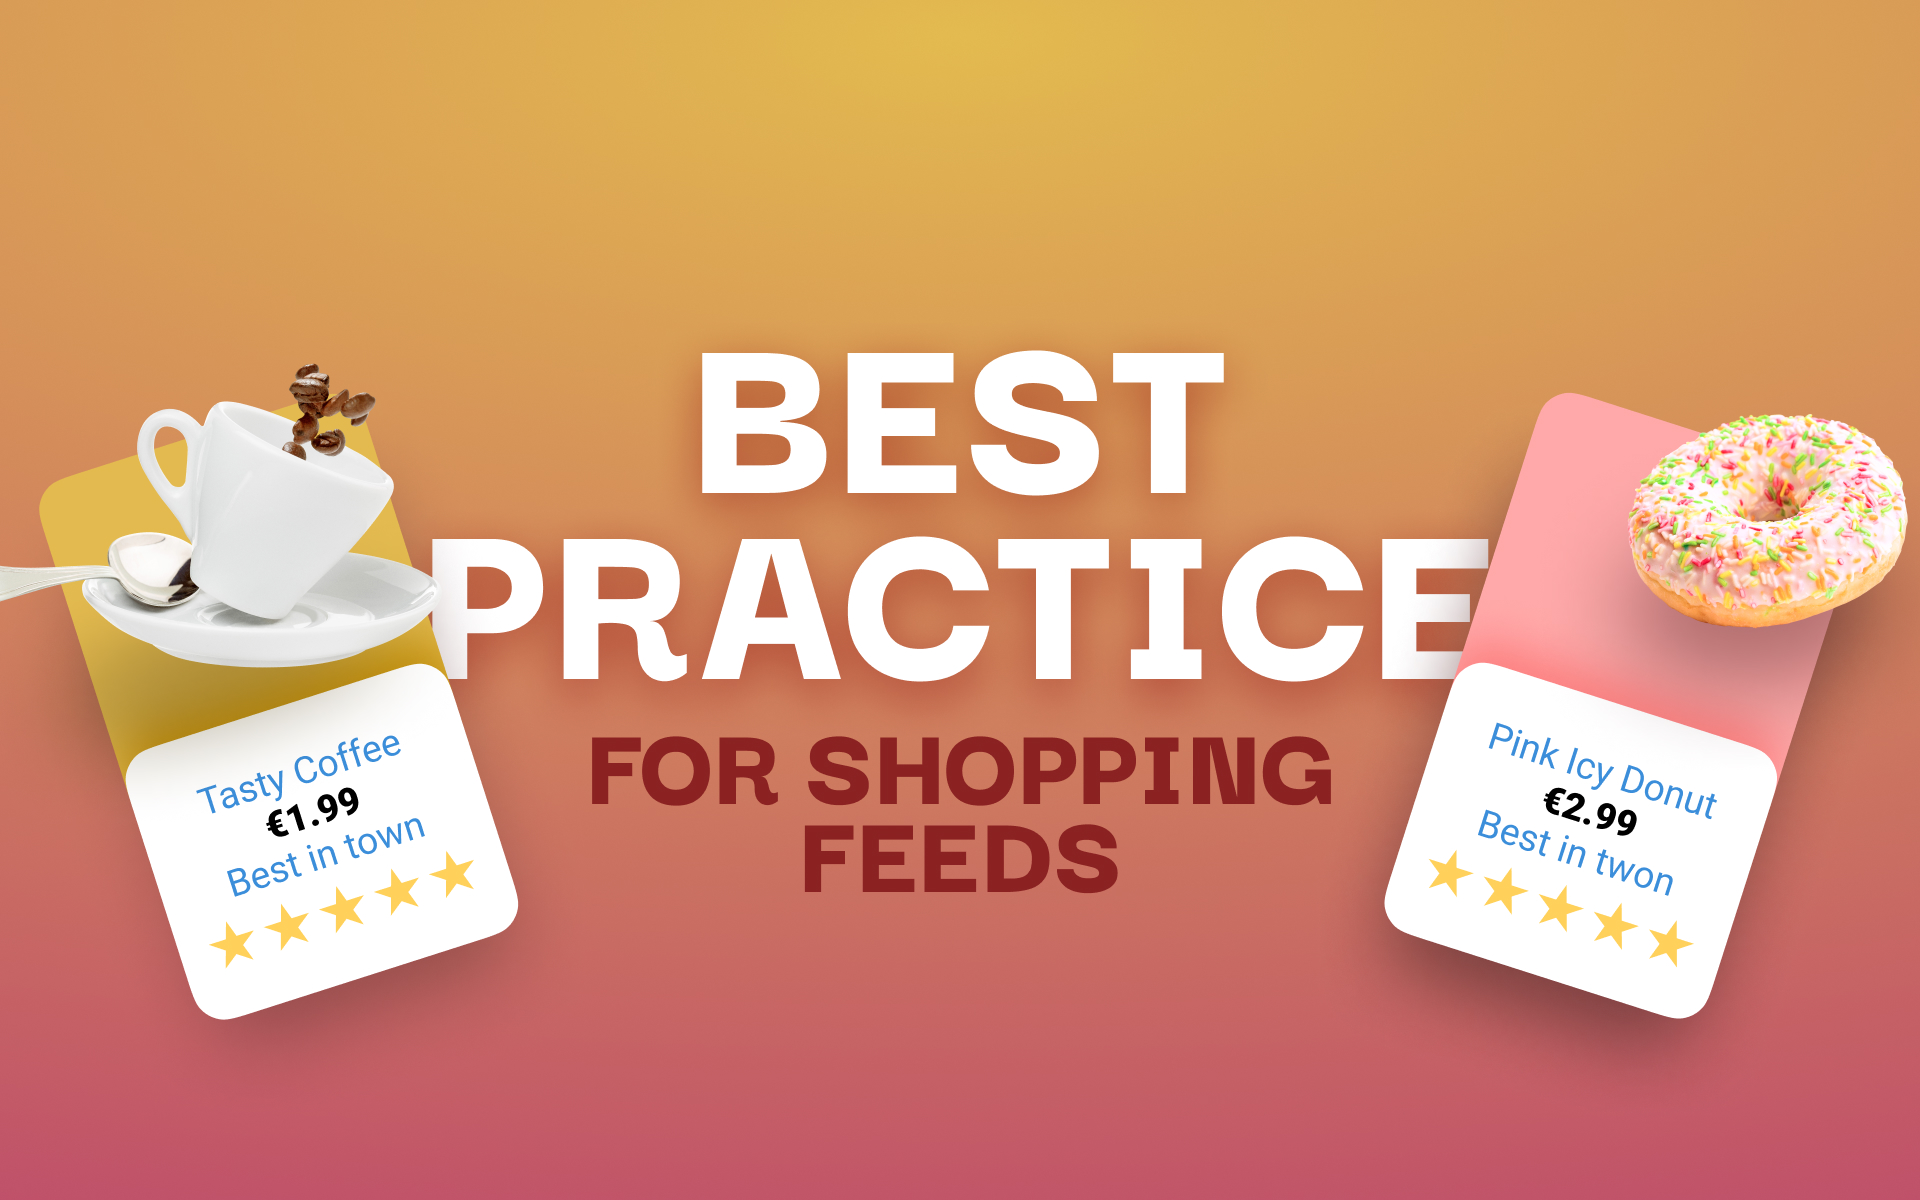 Best practice for shopping feeds